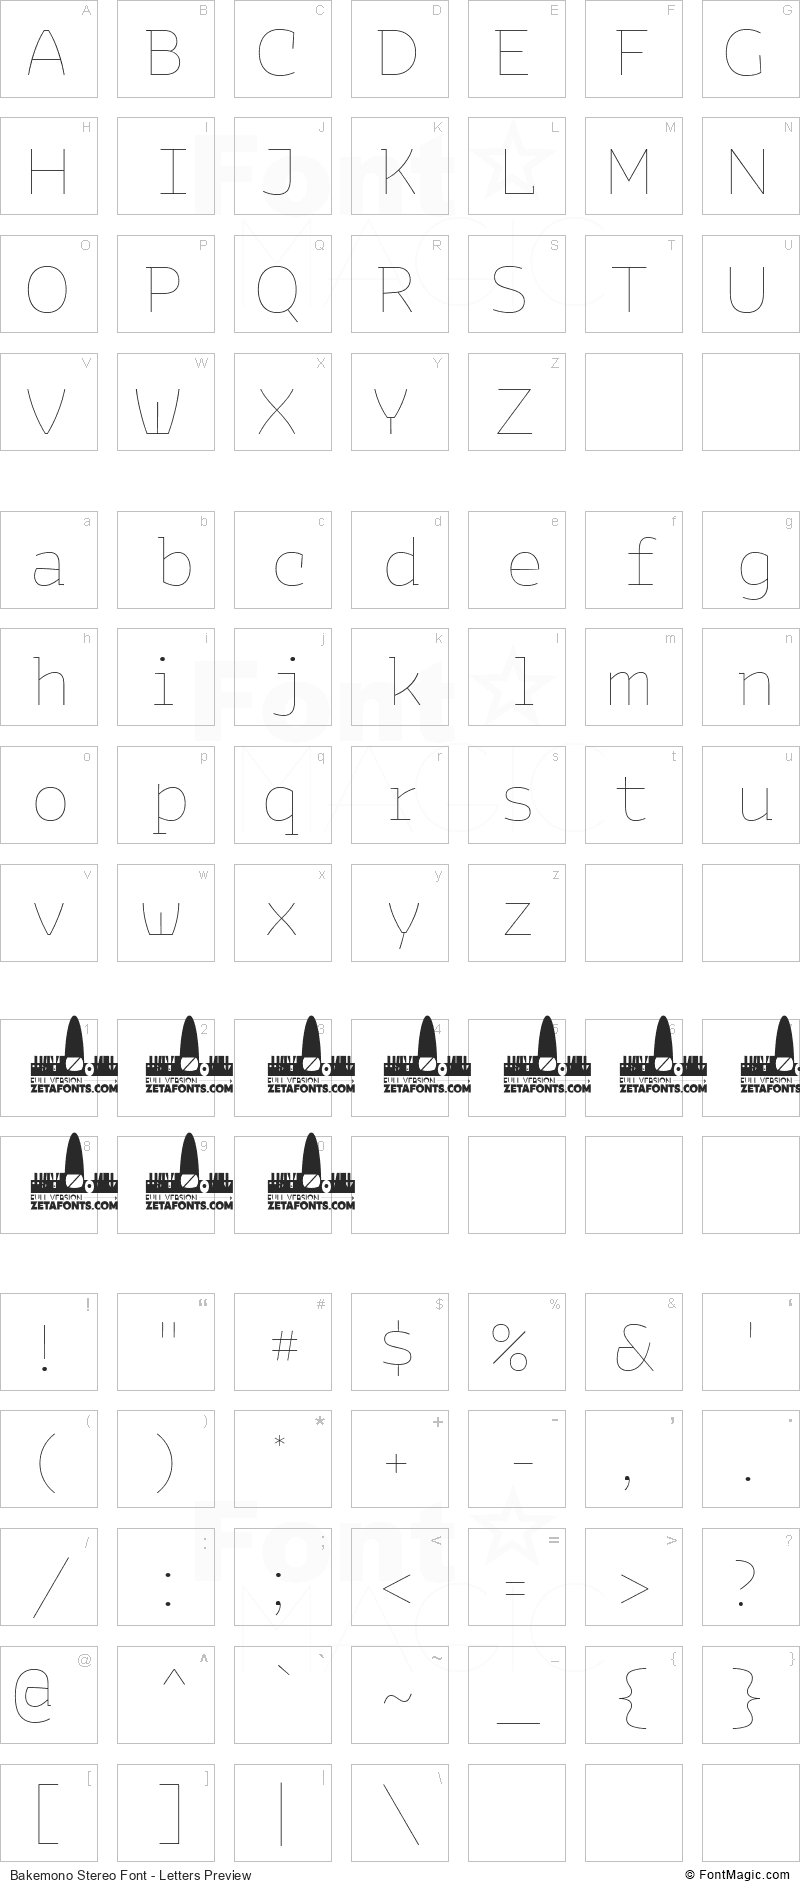 Bakemono Stereo Font - All Latters Preview Chart